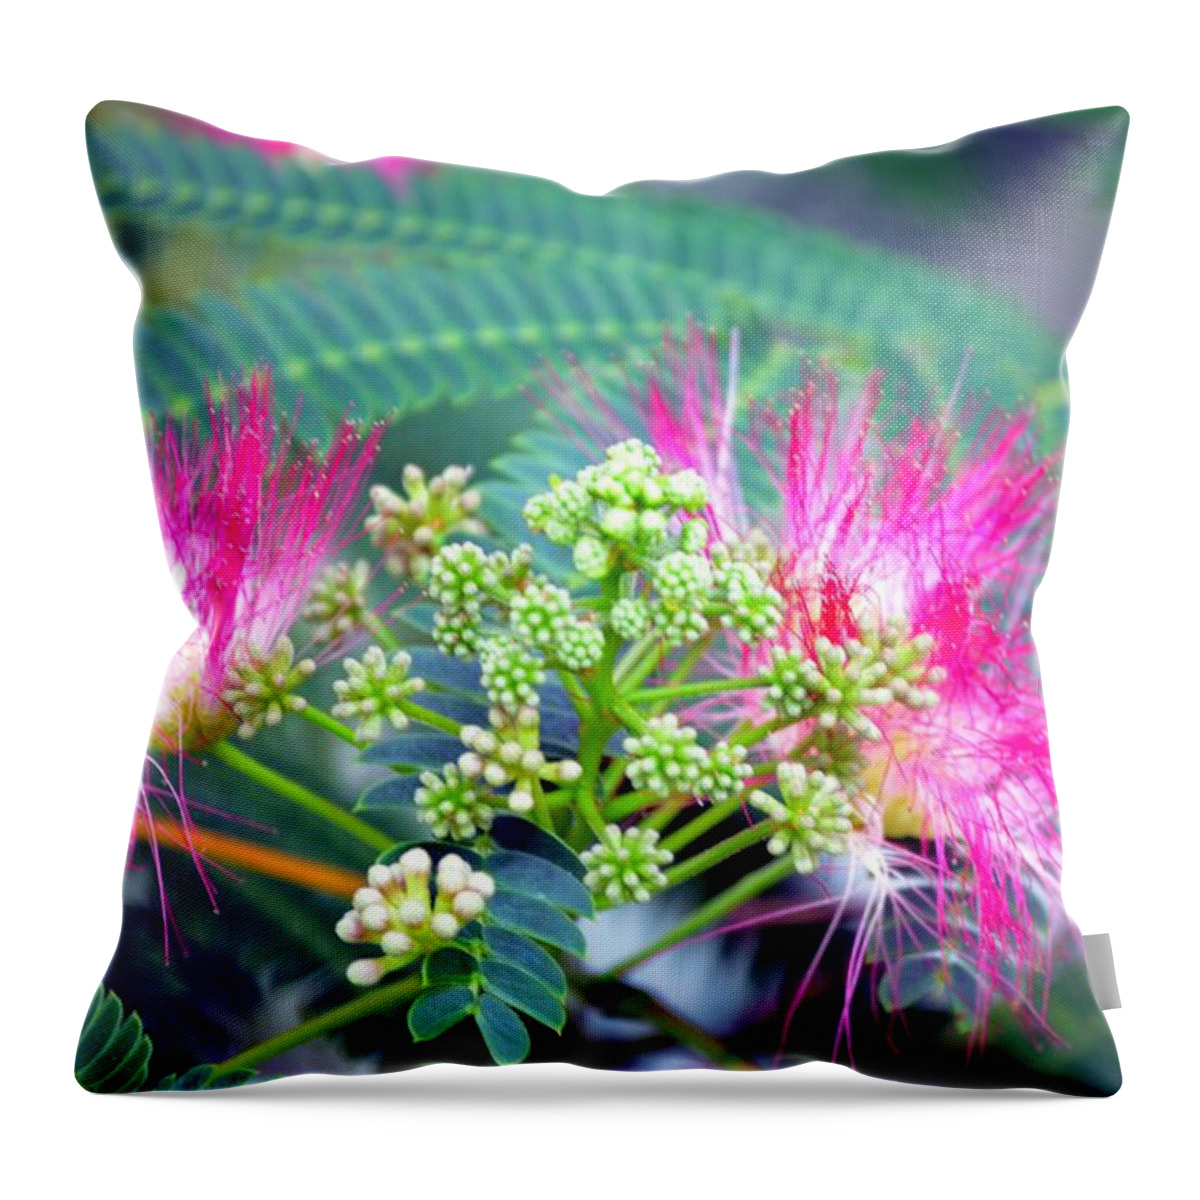 Mimosa Throw Pillow featuring the photograph The Mimosa Tree by Maria Urso